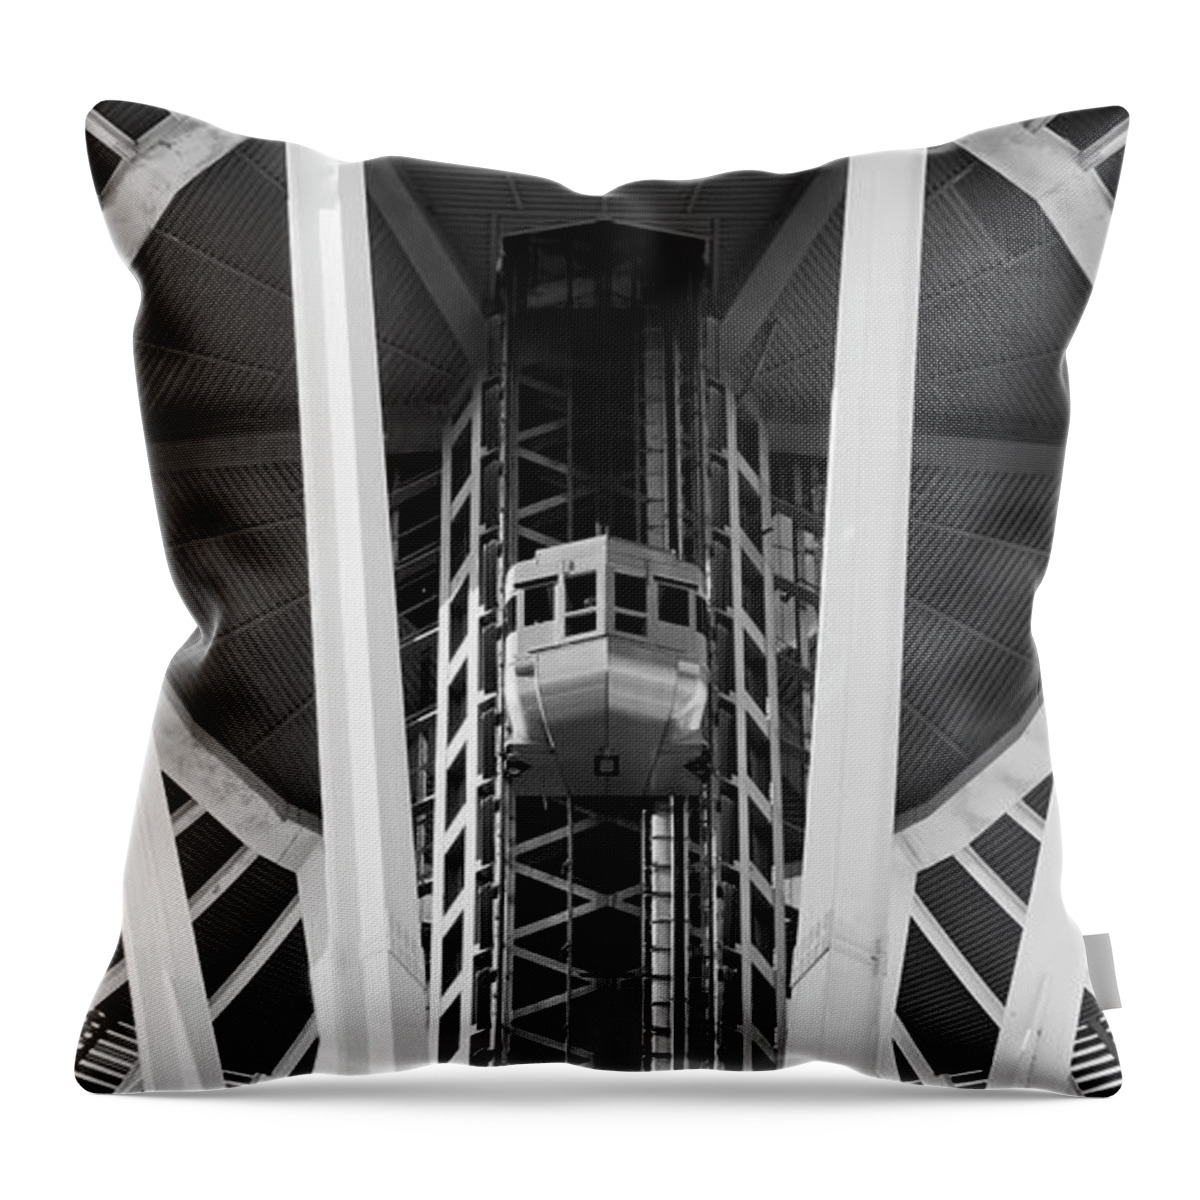 Space Needle Throw Pillow featuring the photograph Space Needle Seattle by Chris Dutton